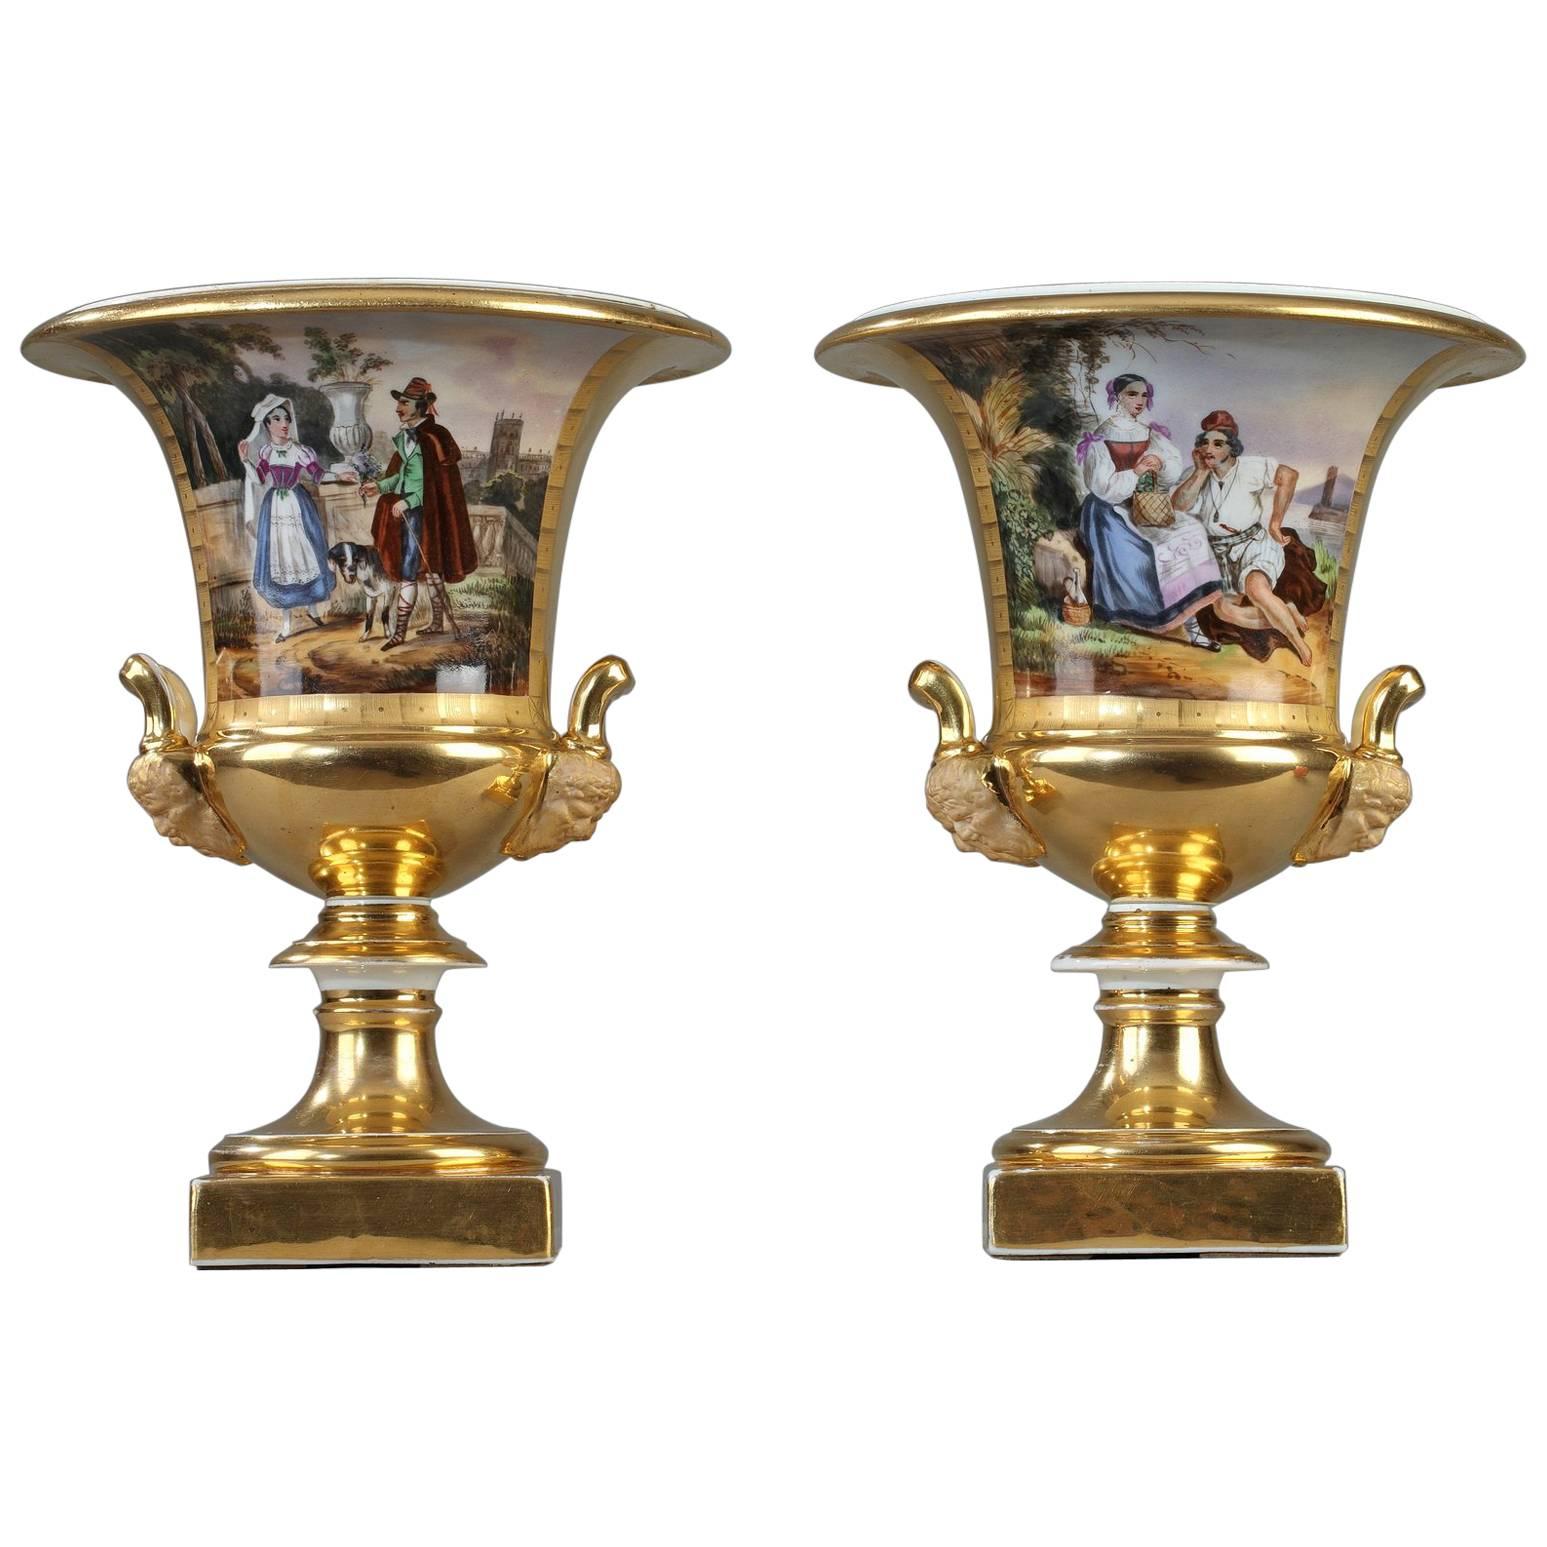 19th Century Pair of Porcelain Medici Vases with Views of Italy